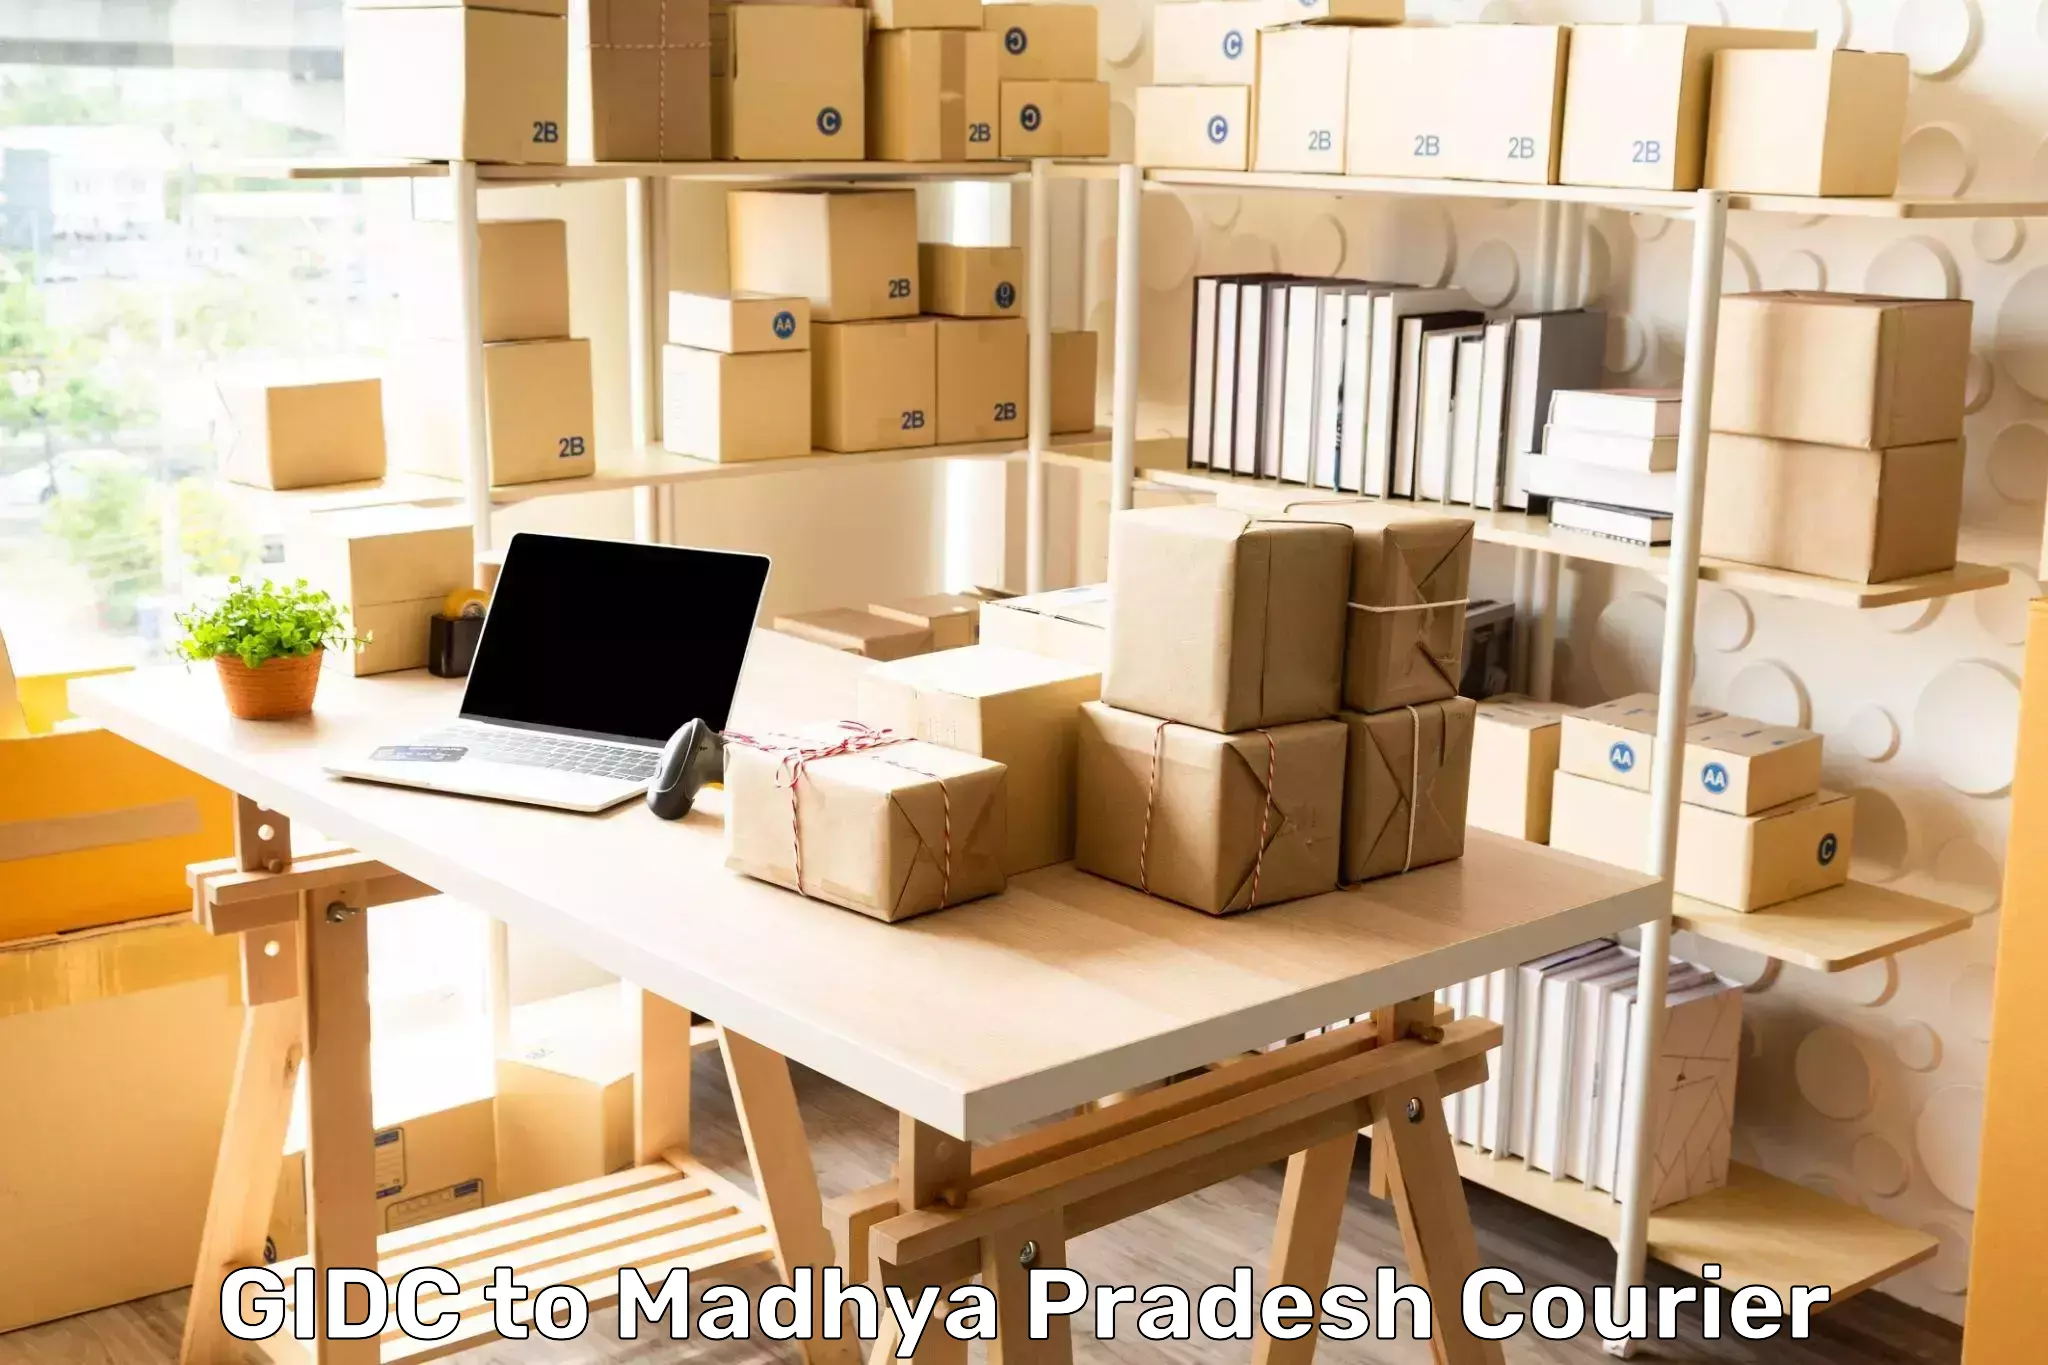 Full-service courier options GIDC to Petlawad